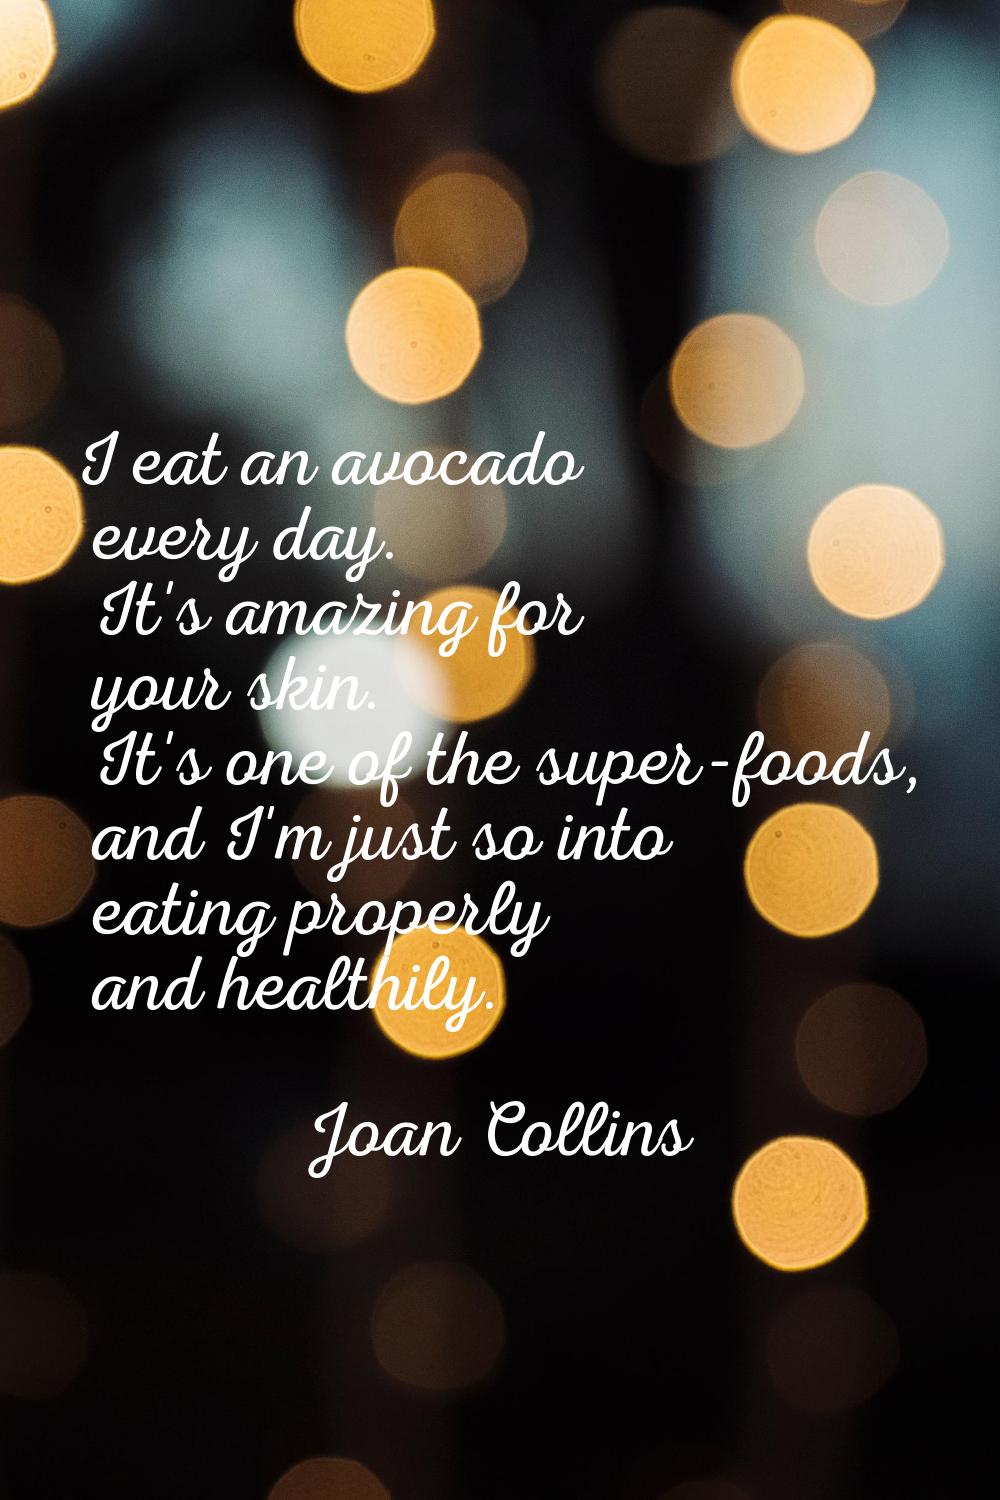 I eat an avocado every day. It's amazing for your skin. It's one of the super-foods, and I'm just s